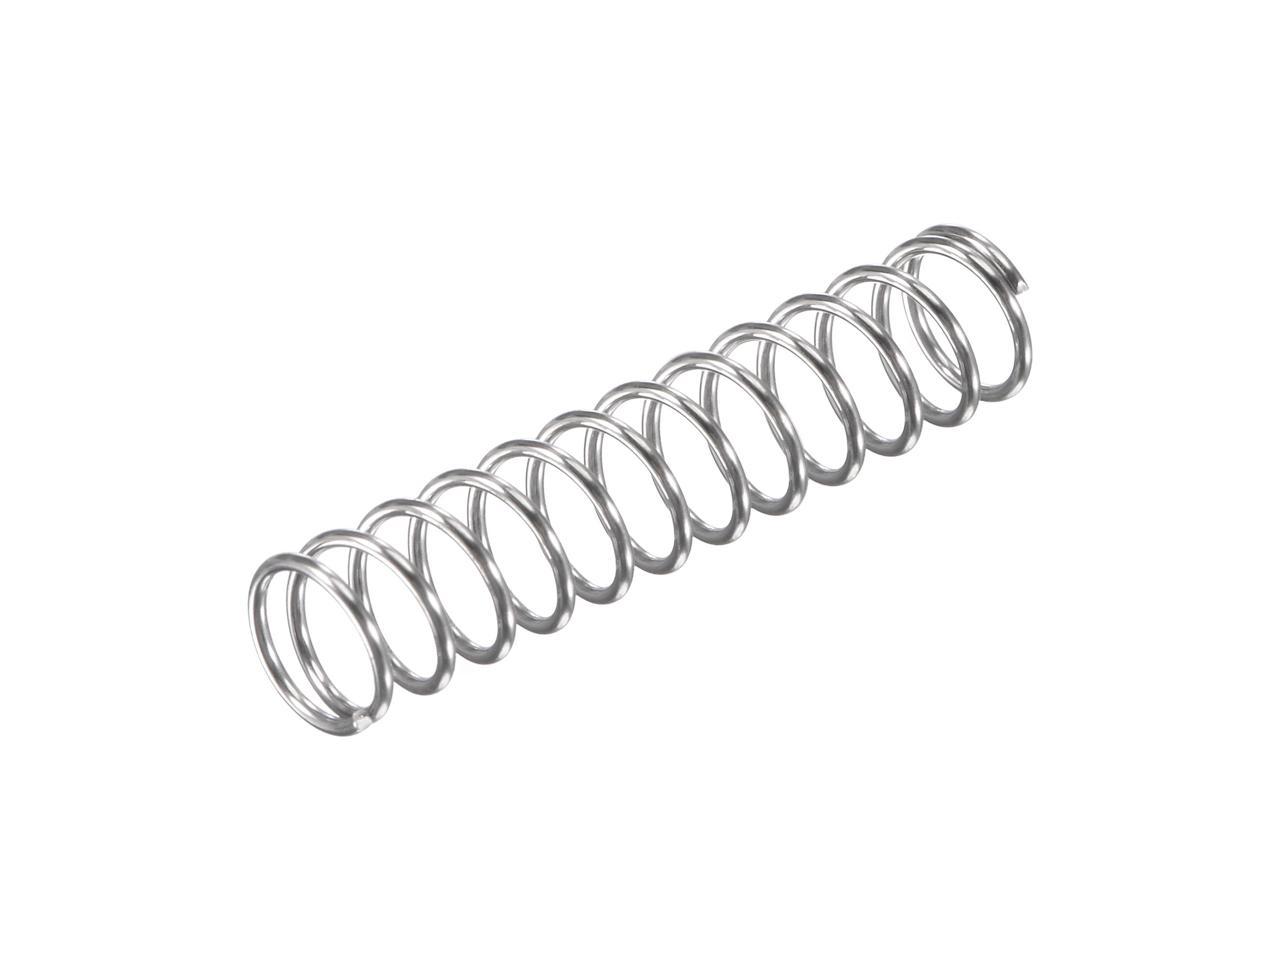 7mmx0.8mmx50mm 304 Stainless Steel Compression Spring 17.2N Load Capacity 20pcs 